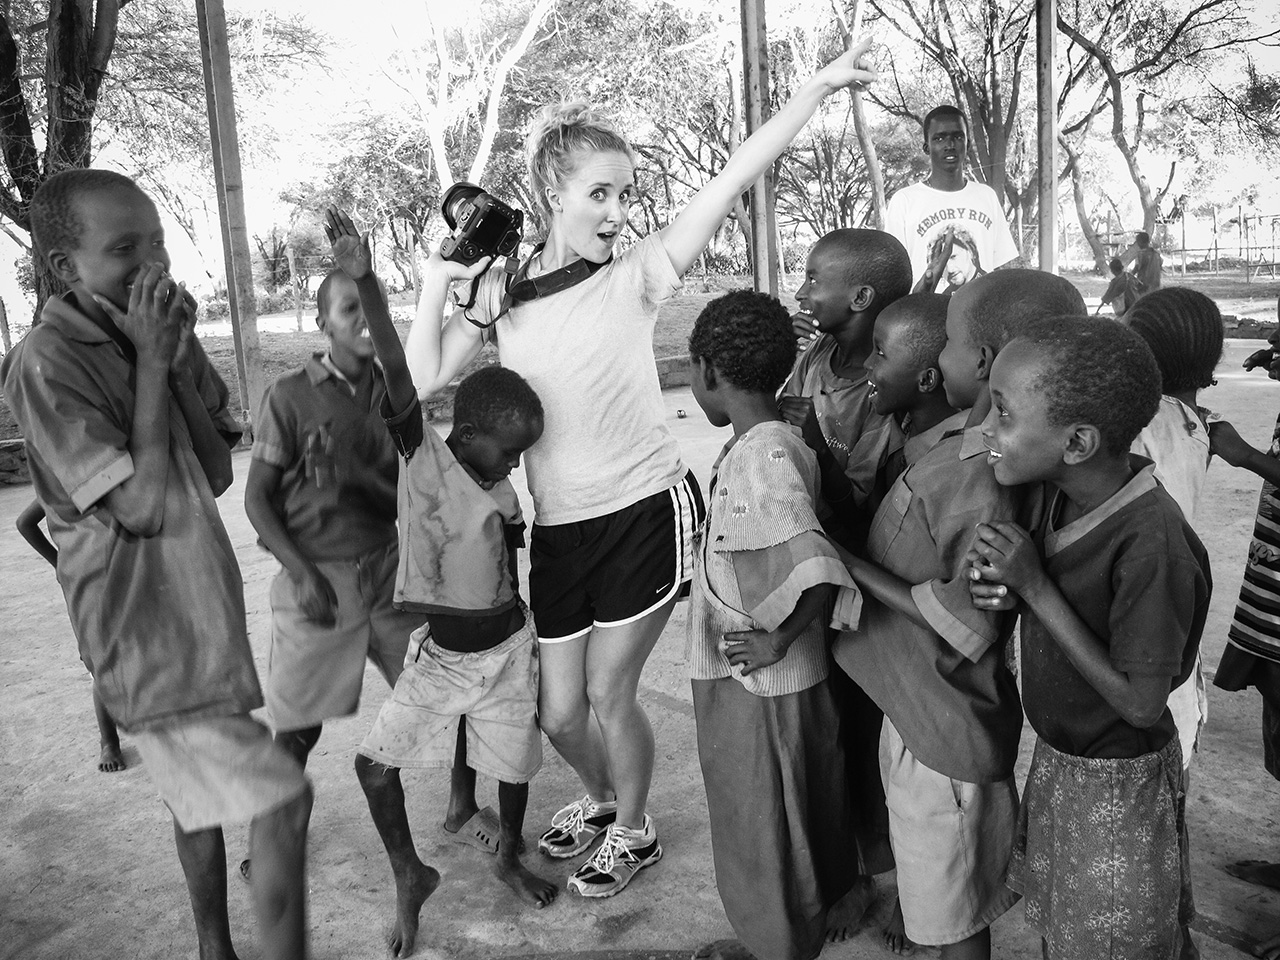 Typical down time during the day in Kenya, haha. The picture was taken by one of these kids with my extra camera.  